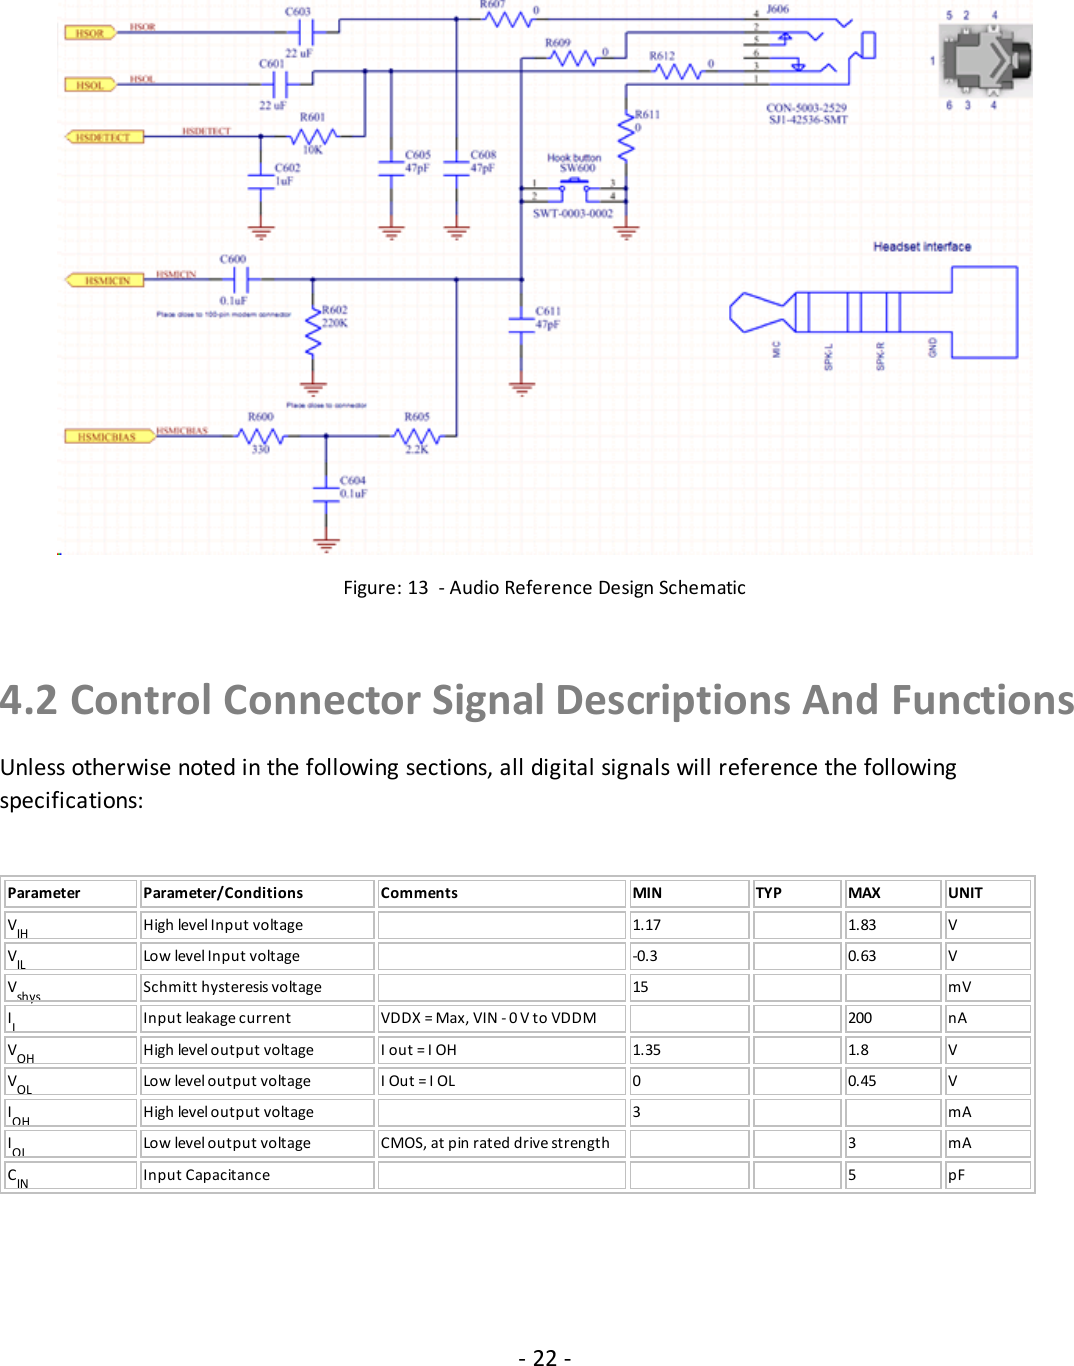 Figure: 13 - Audio Reference Design Schematic4.2 Control Connector Signal Descriptions And FunctionsUnless otherwise noted in the following sections, all digital signals will reference the followingspecifications:Parameter Parameter/Conditions Comments MIN TYP MAX UNITVIH High level Input voltage 1.17 1.83 VVIL Low level Input voltage -0.3 0.63 VVshys Schmitt hysteresis voltage 15 mVILInput leakage current VDDX = Max, VIN - 0 V to VDDM 200 nAVOH High level output voltage I out = I OH 1.35 1.8 VVOL Low leveloutput voltage I Out = I OL 0 0.45 VIOH High level output voltage 3 mAIOL Low level output voltage CMOS, at pin rated drive strength 3 mACIN Input Capacitance 5 pF- 22 -